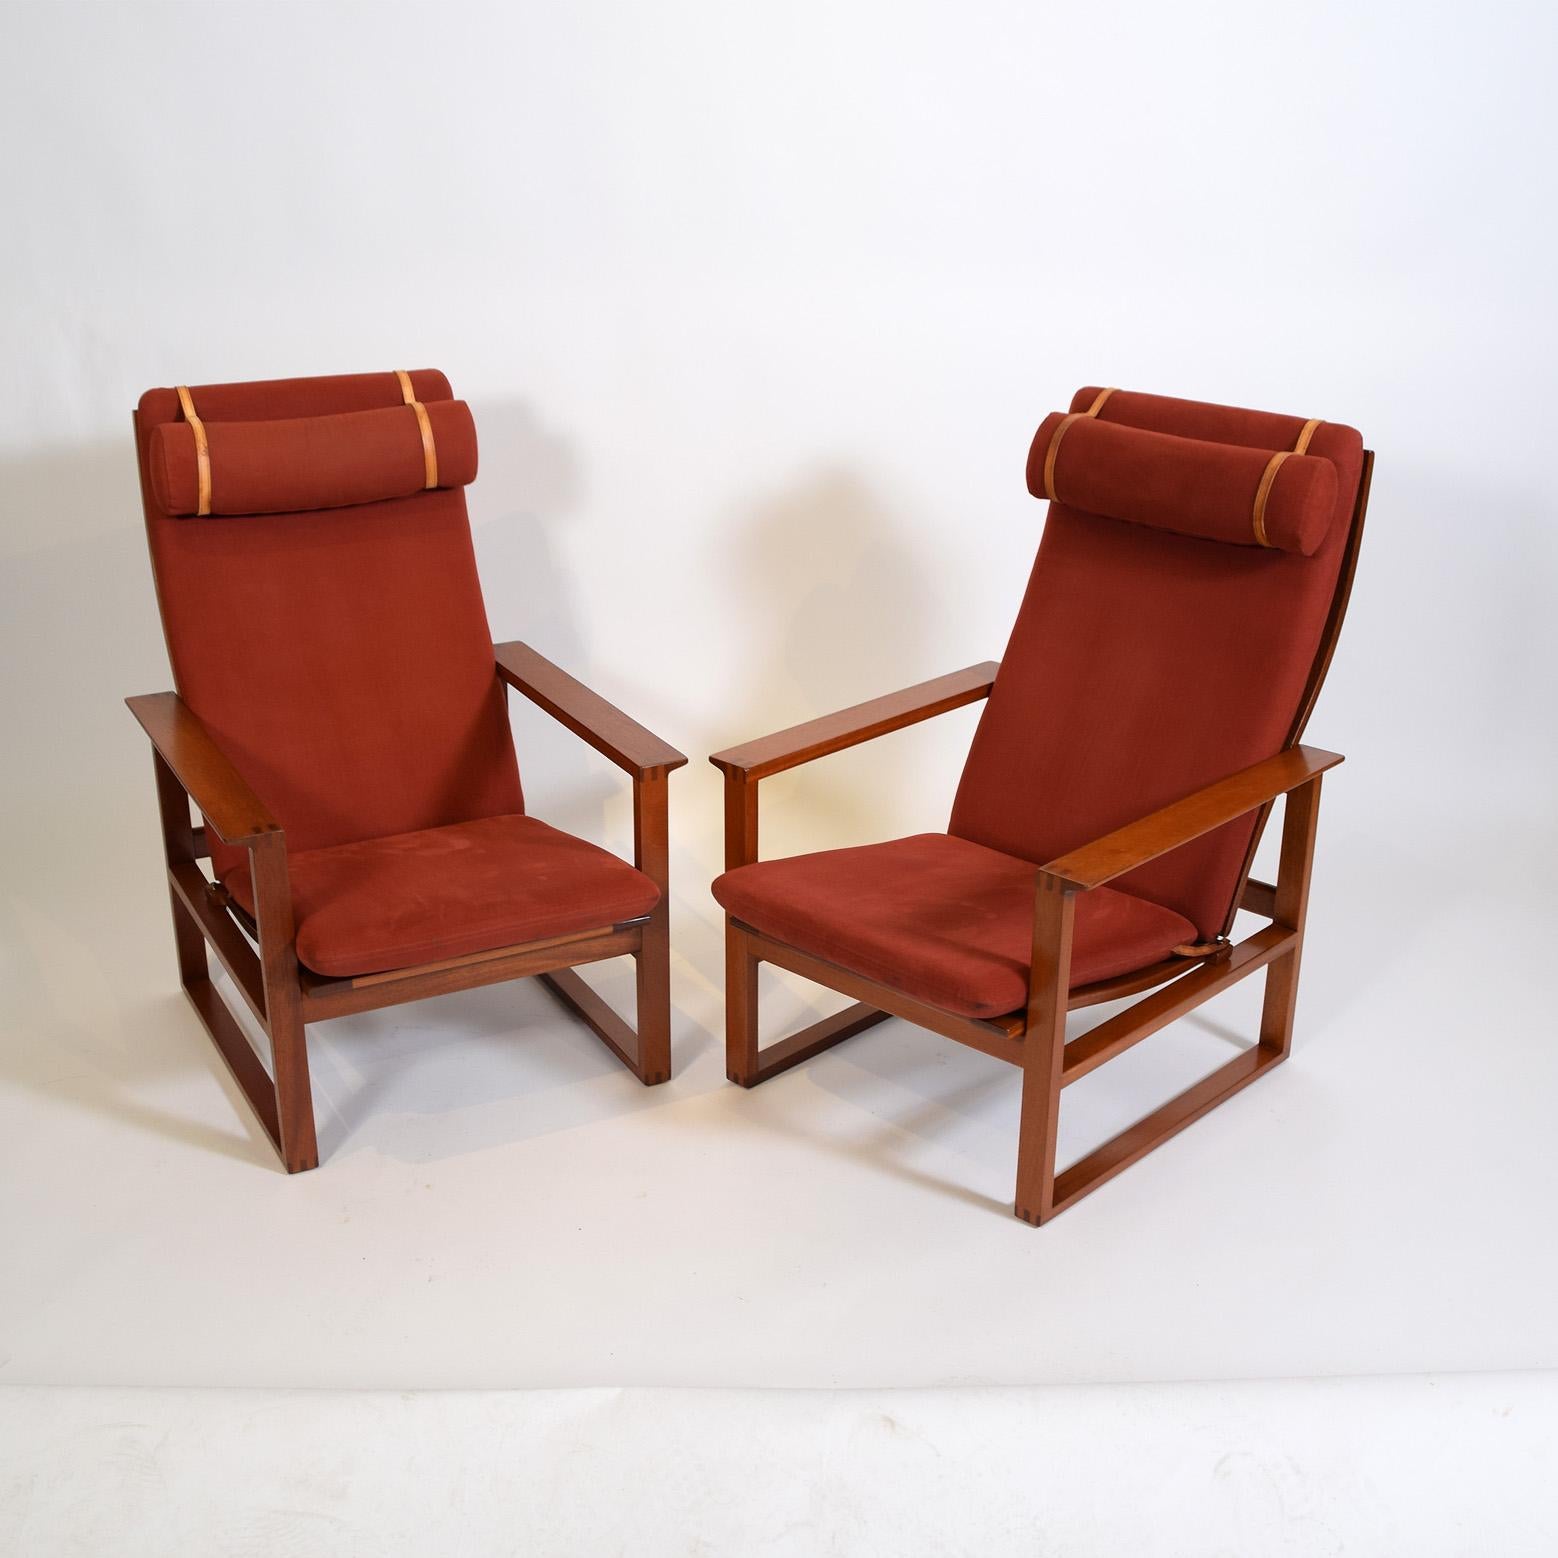 Pair lounge chair 'BM-2254/ designed by Børge Mogensen in 1956 and produced by Fredericia Stolefabrik adjustable mahogany frame.